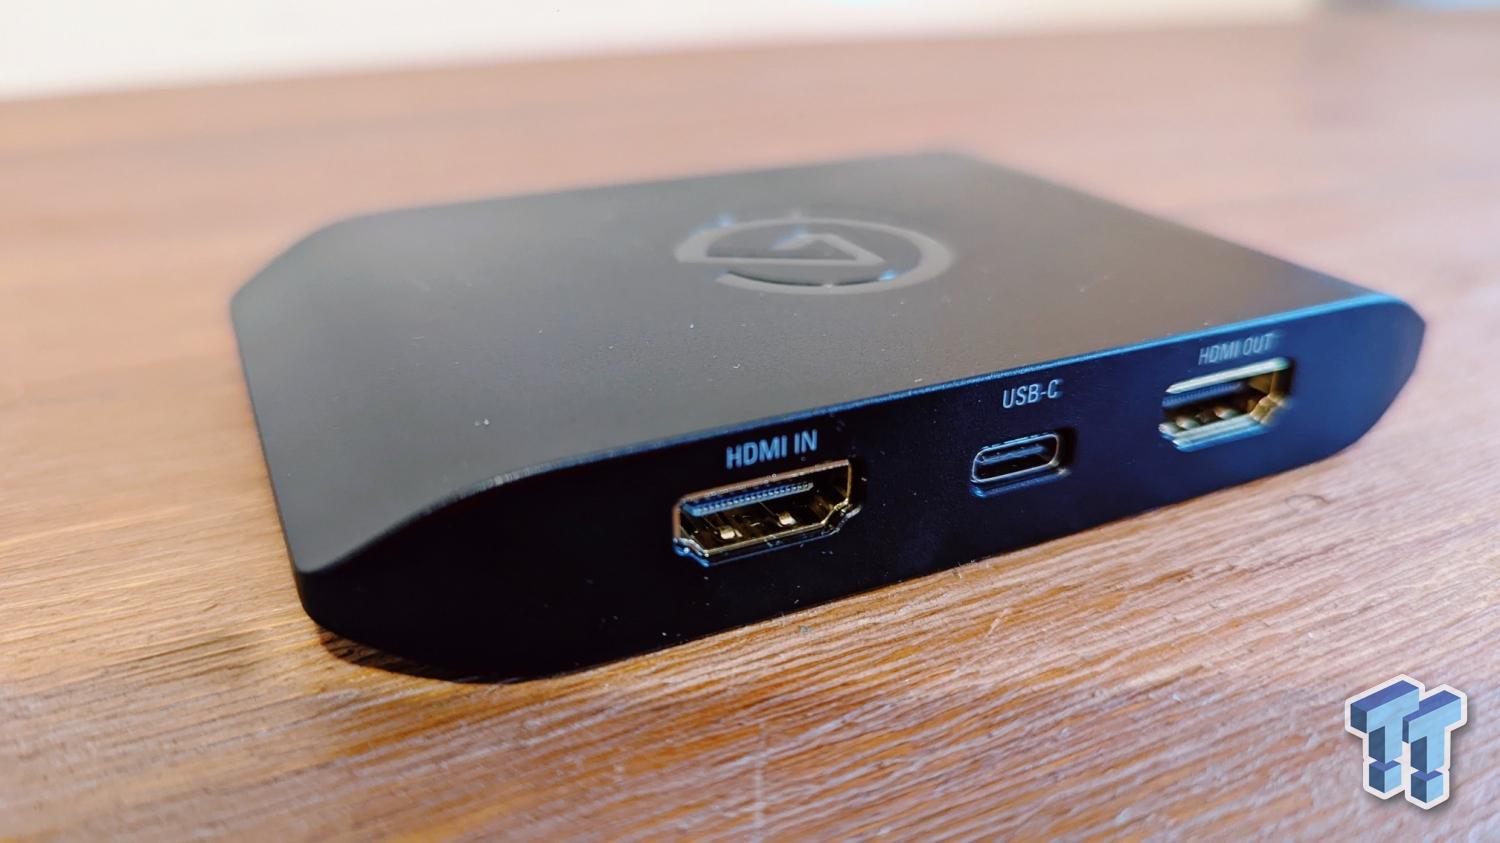 Elgato HD60 X External Capture Card - video capture adapter - USB-C -  10GBE9901 - Streaming Devices 